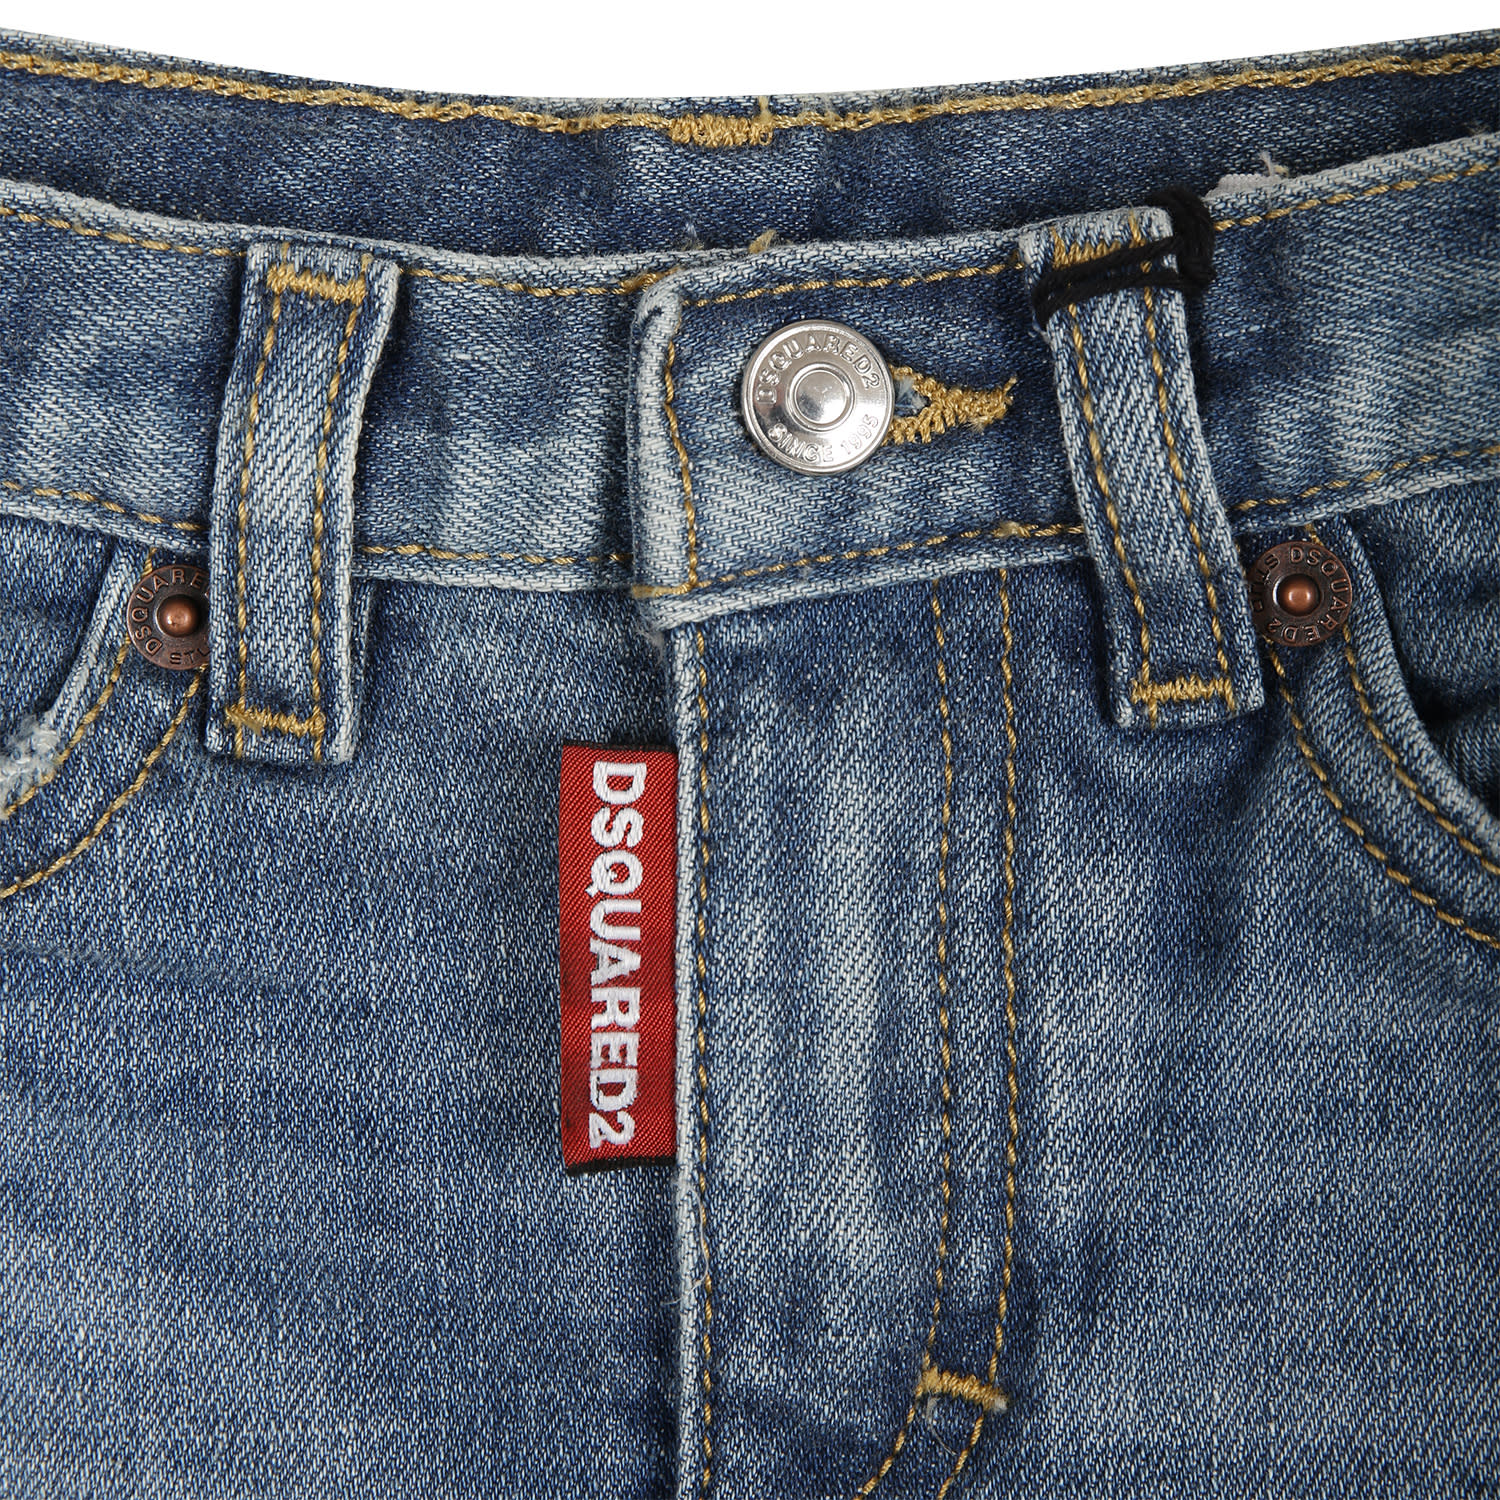 Shop Dsquared2 Denim Jeans For Baby Boy With Logo